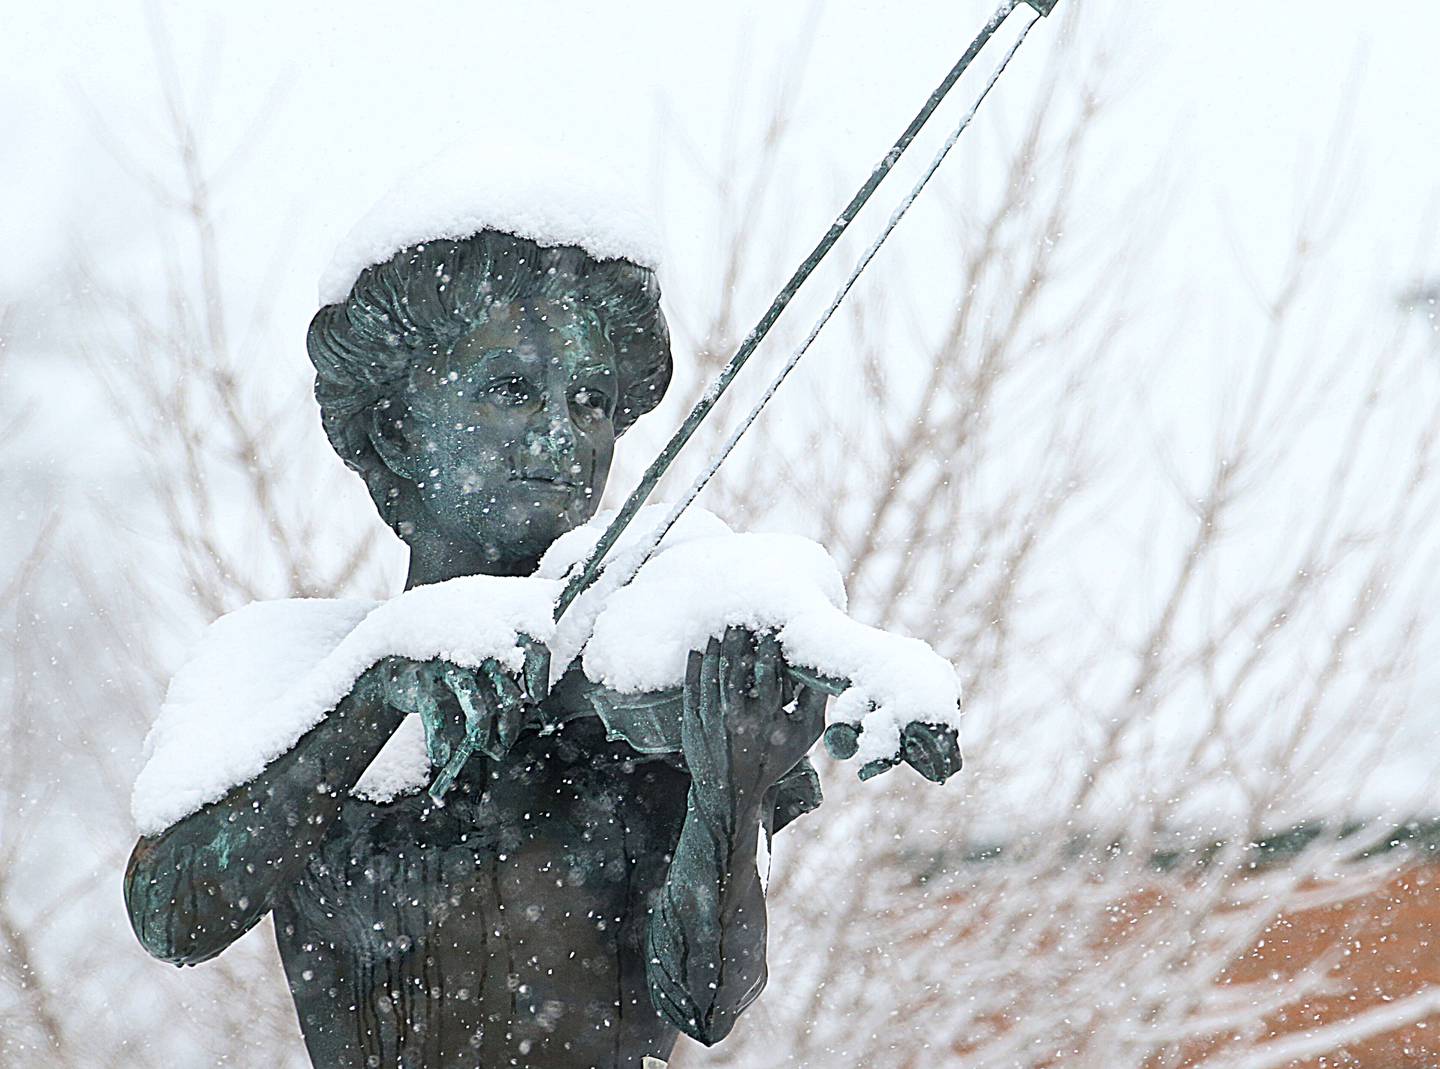 Heavy snow falls down on the Maud Powell Statue on Wednesday, Jan. 25, 2023 in Peru.